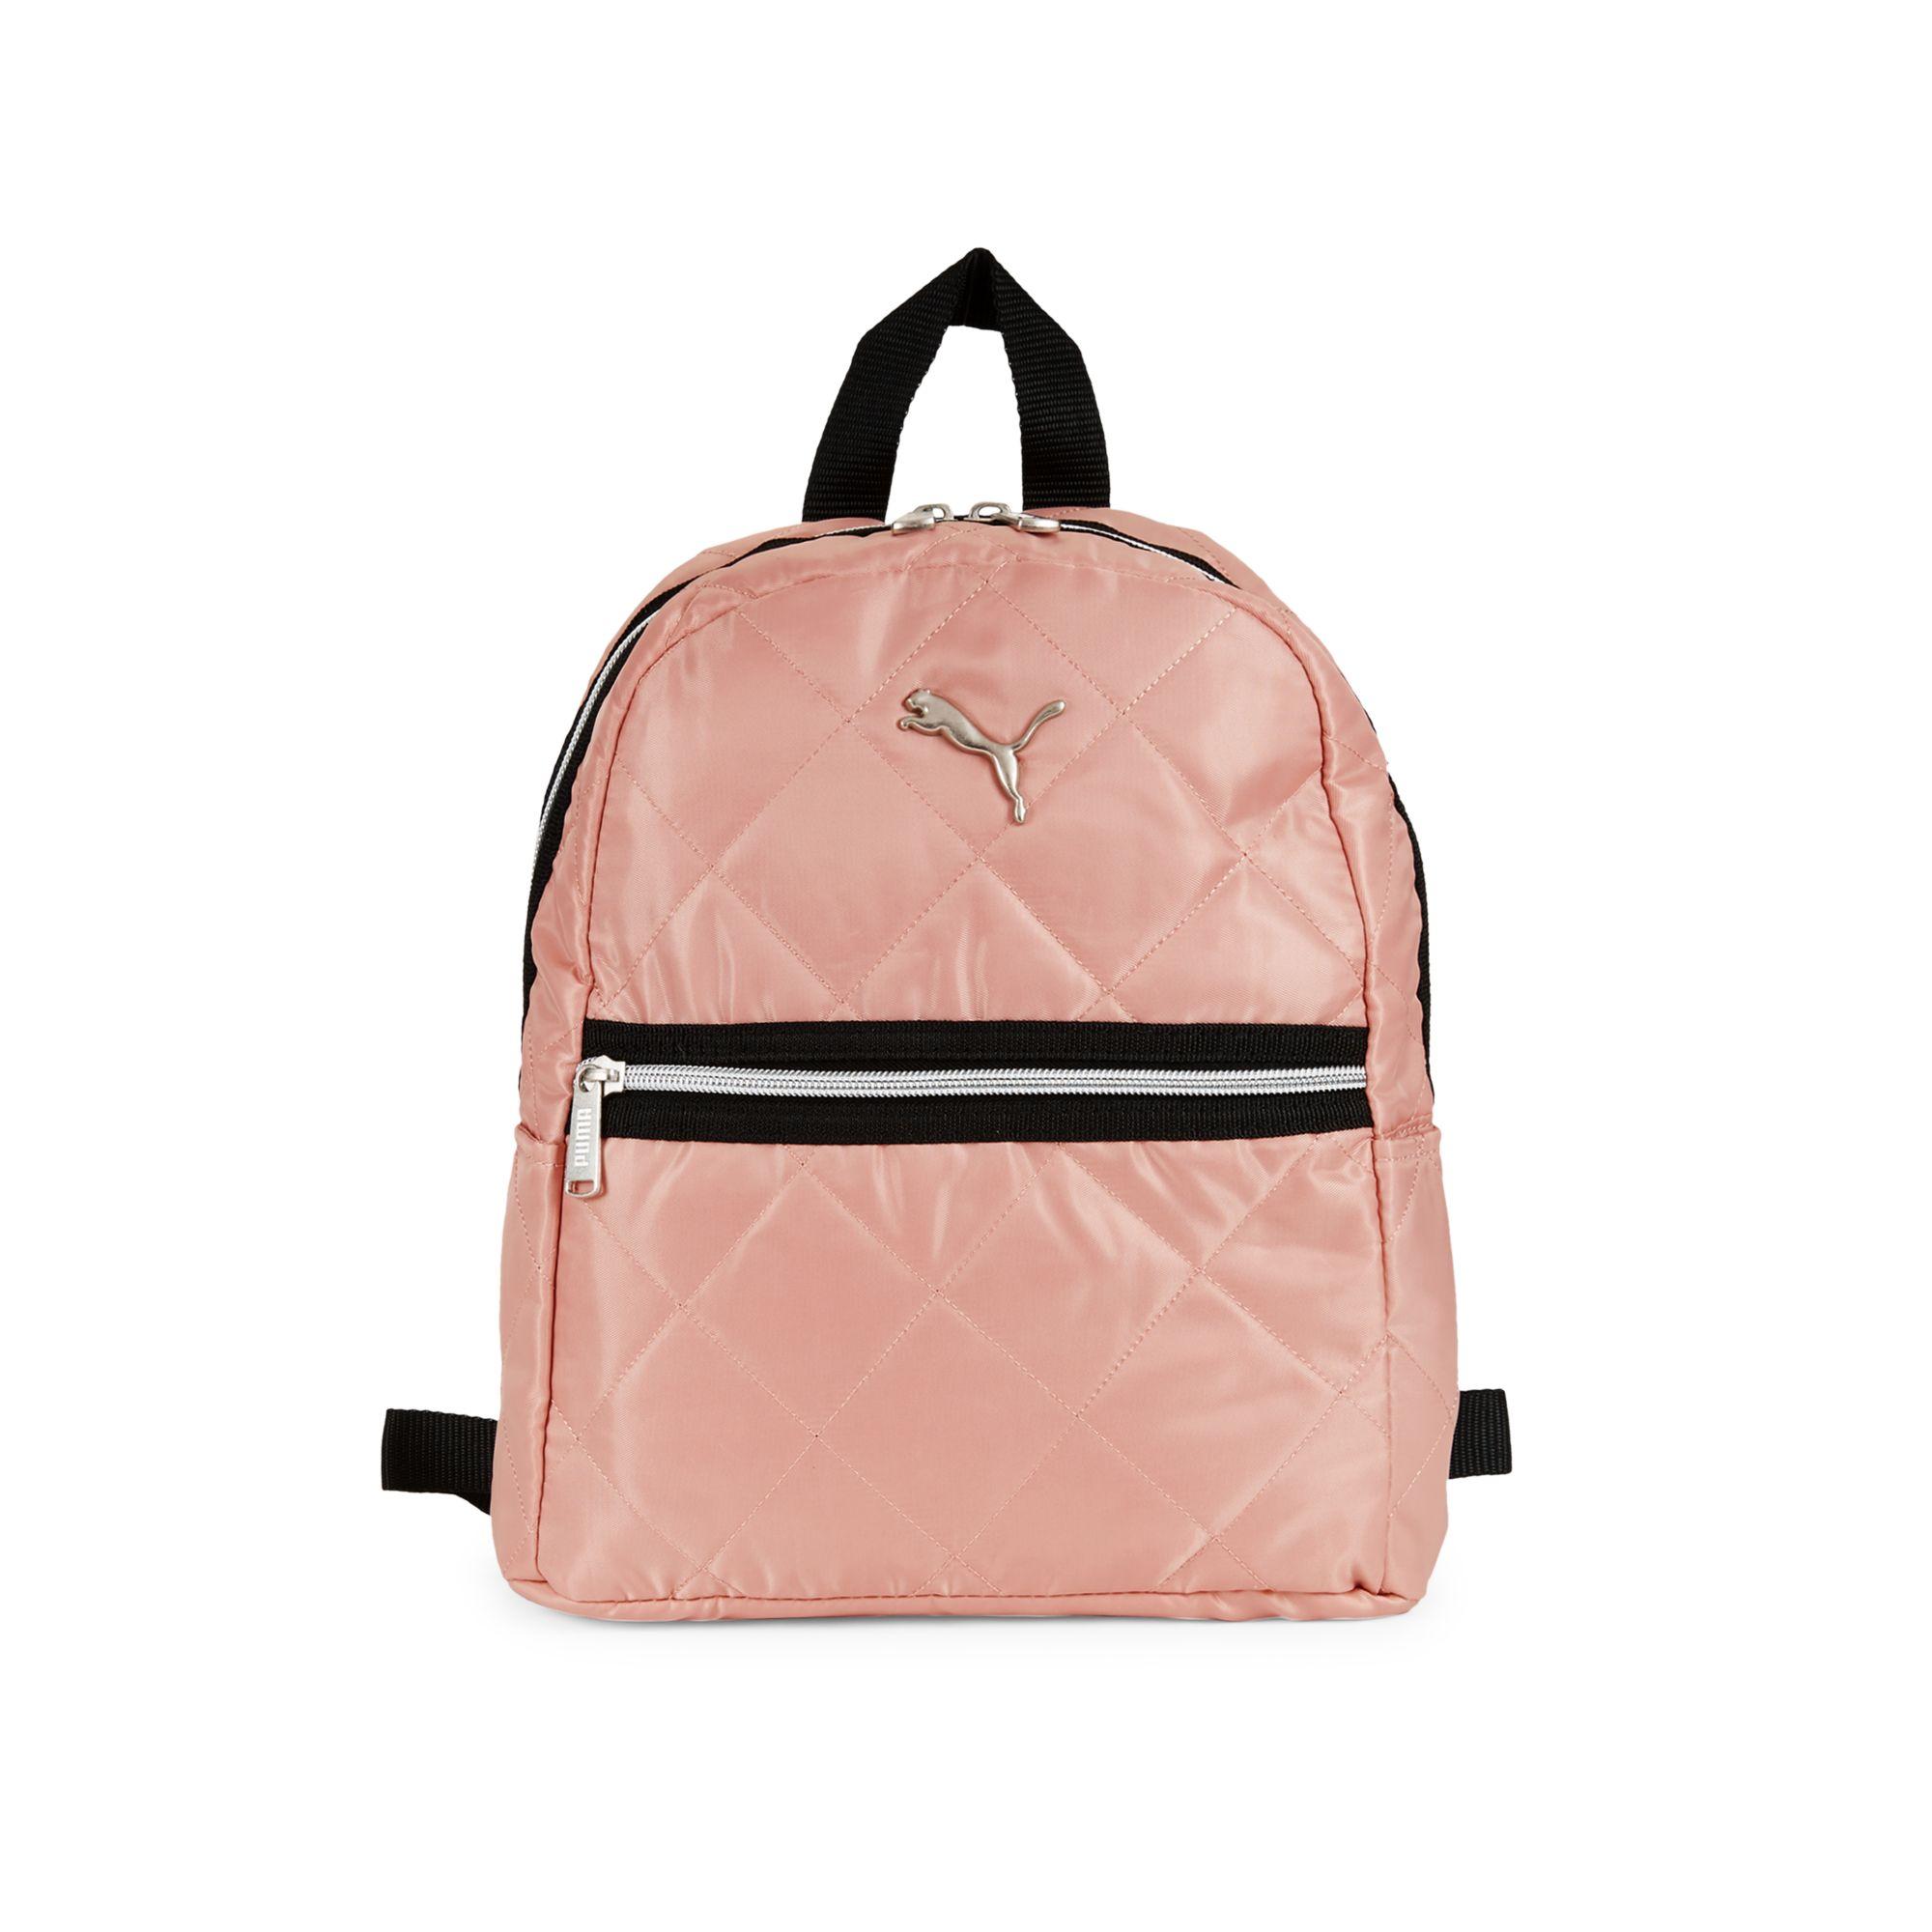 PUMA Synthetic Orbital Mini Backpack in Pink/Black (Pink) | Lyst